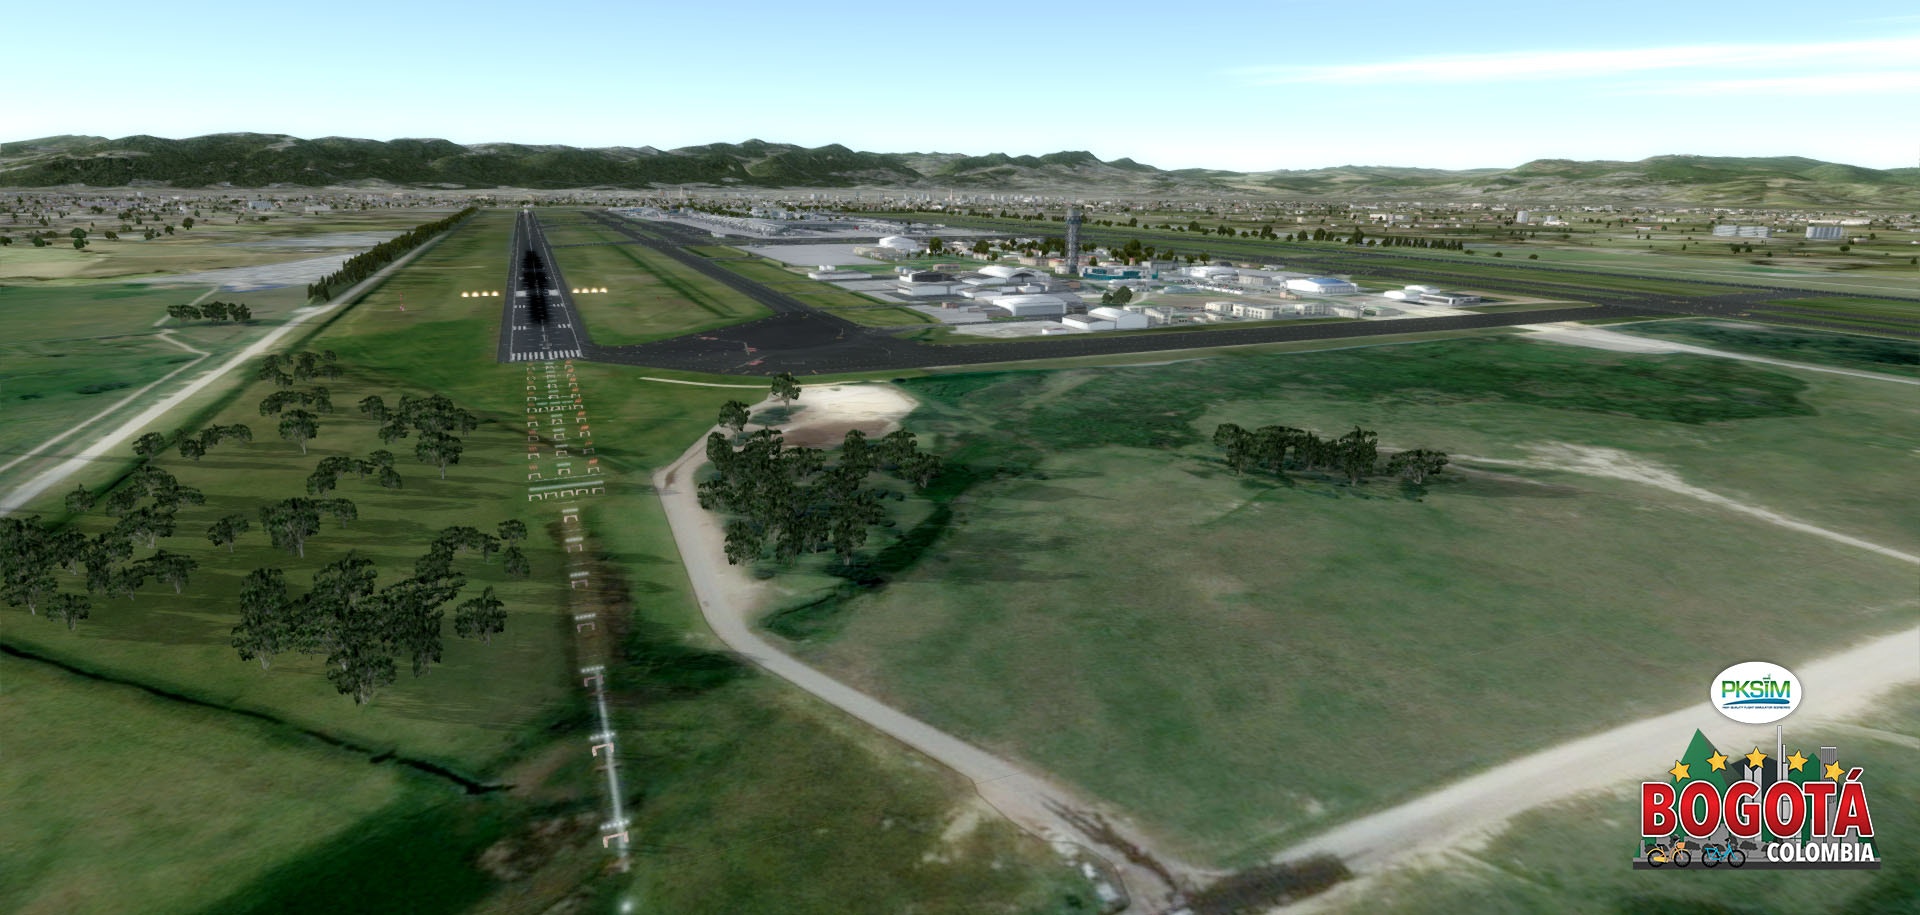 Review: Orbx Essendon Fields Airport for MSFS